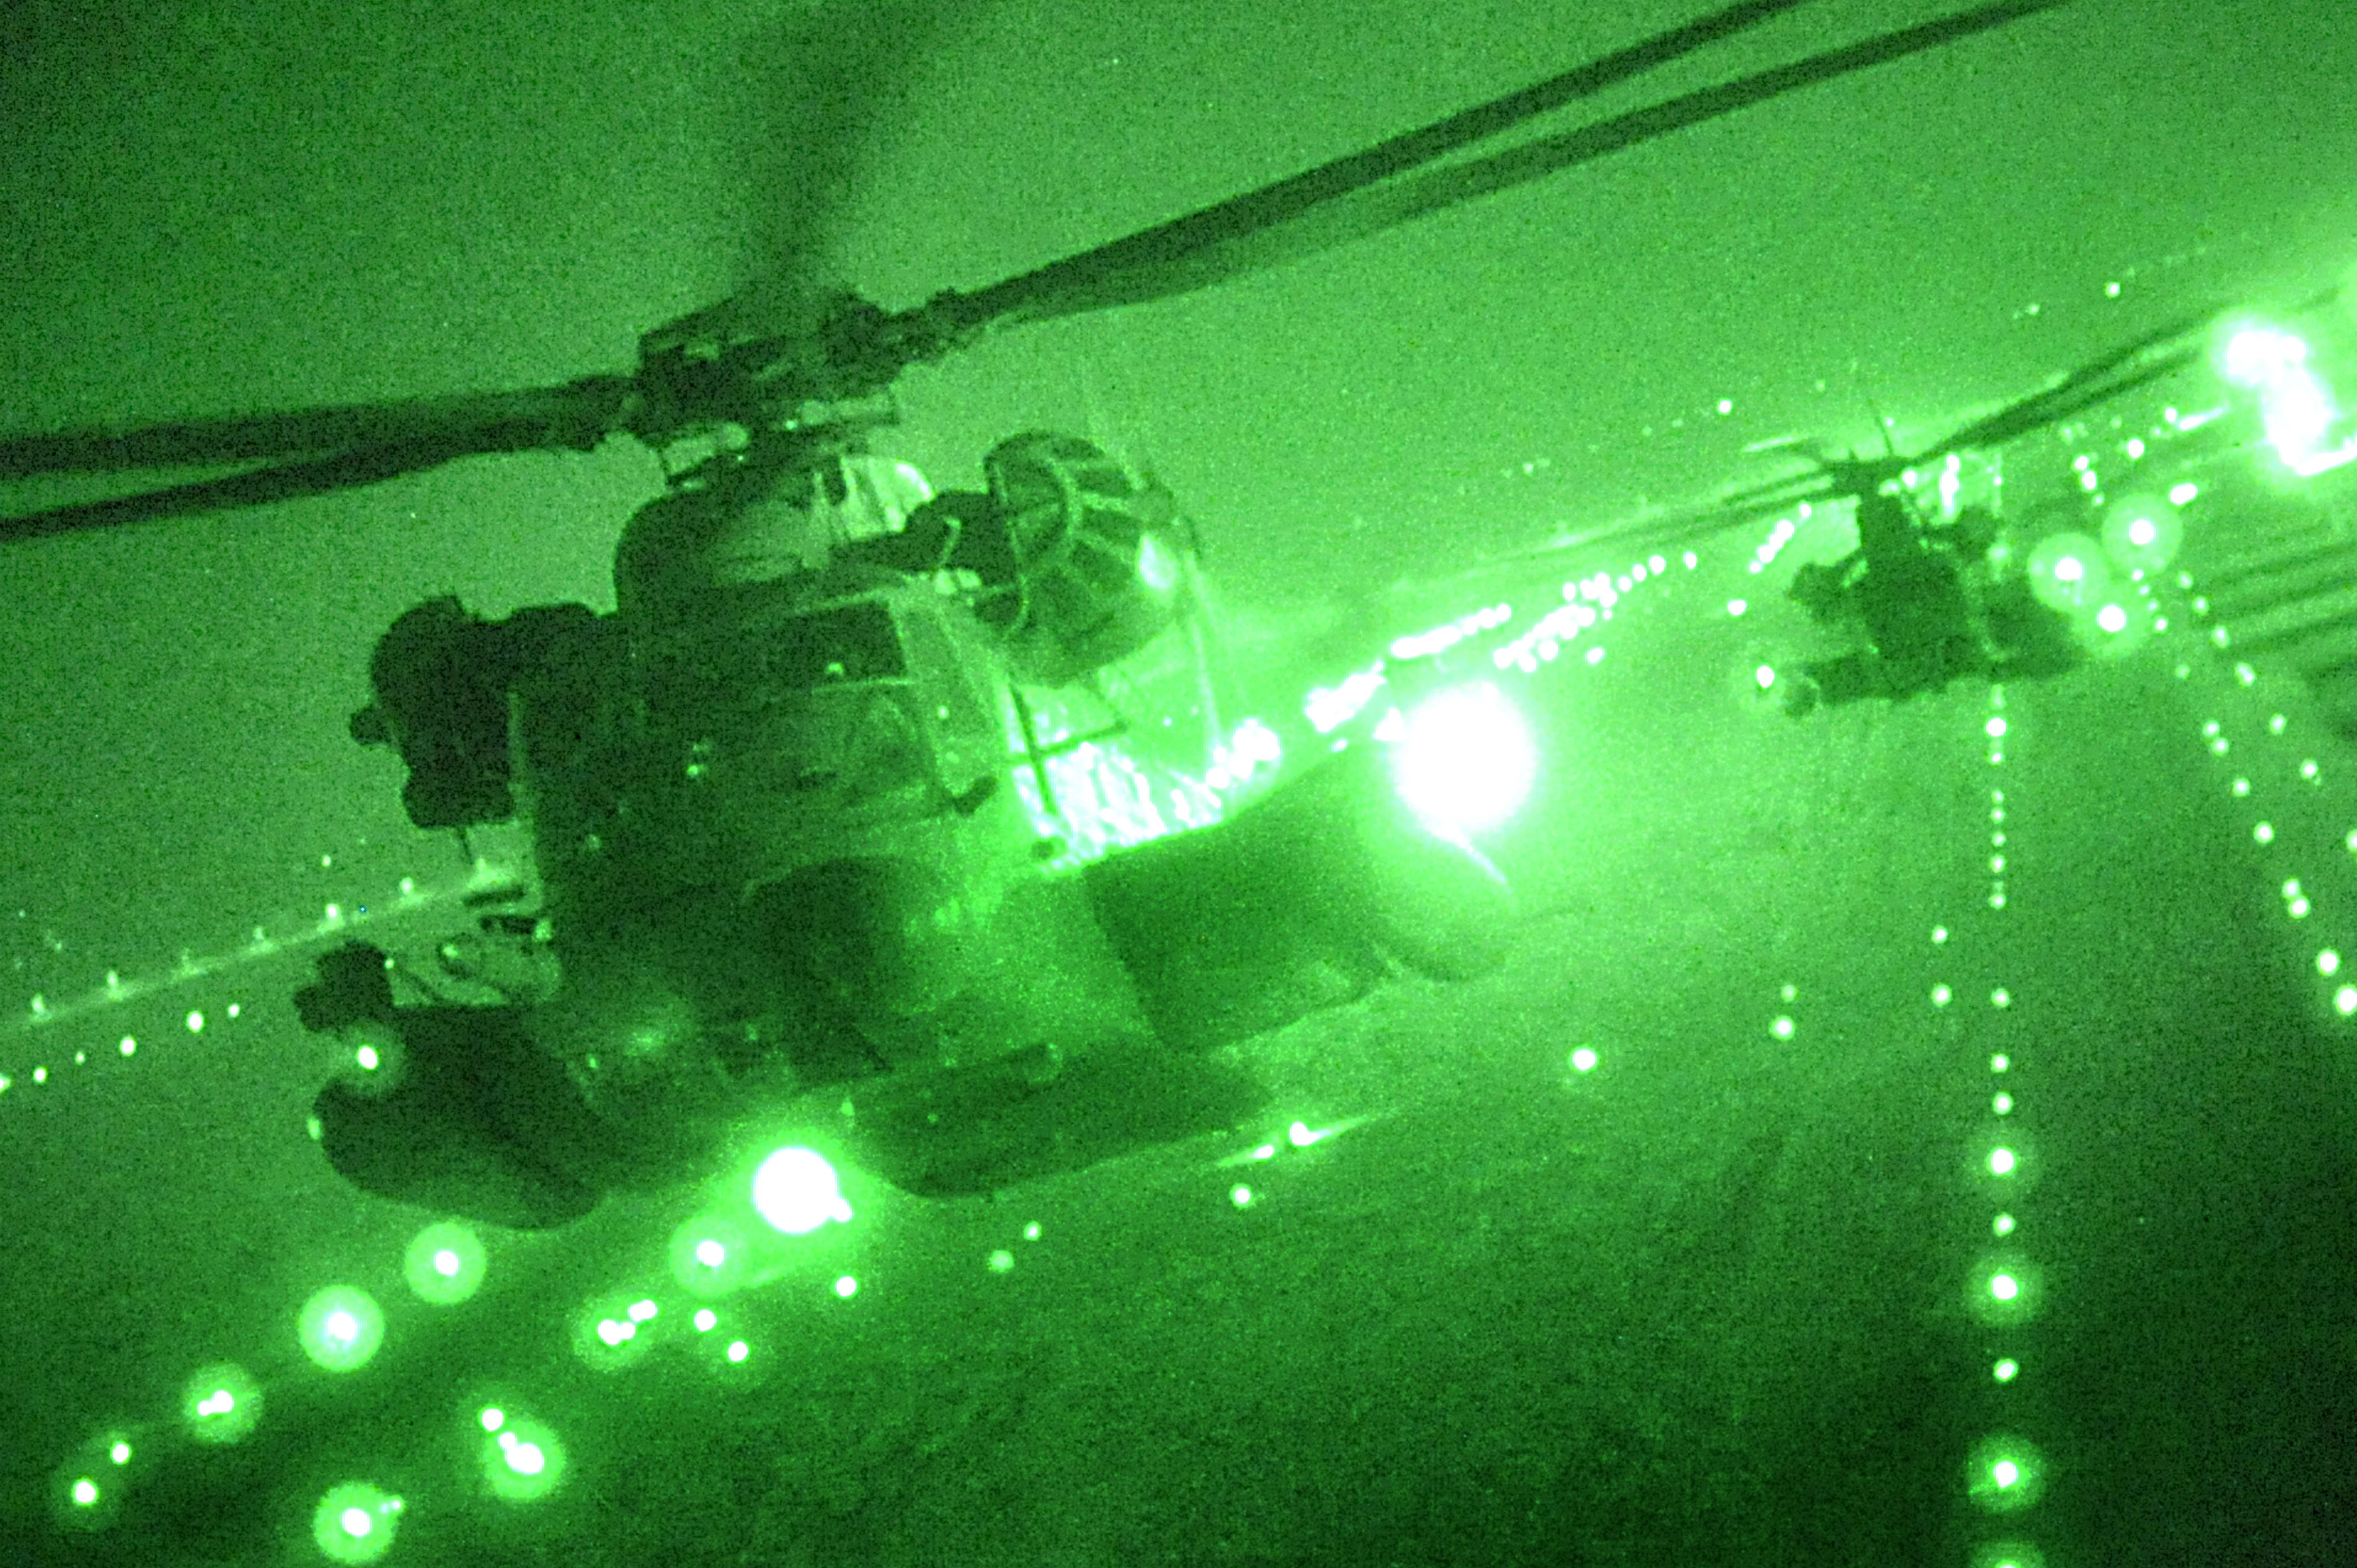 MH-53 Pavelow Helicopter - Night